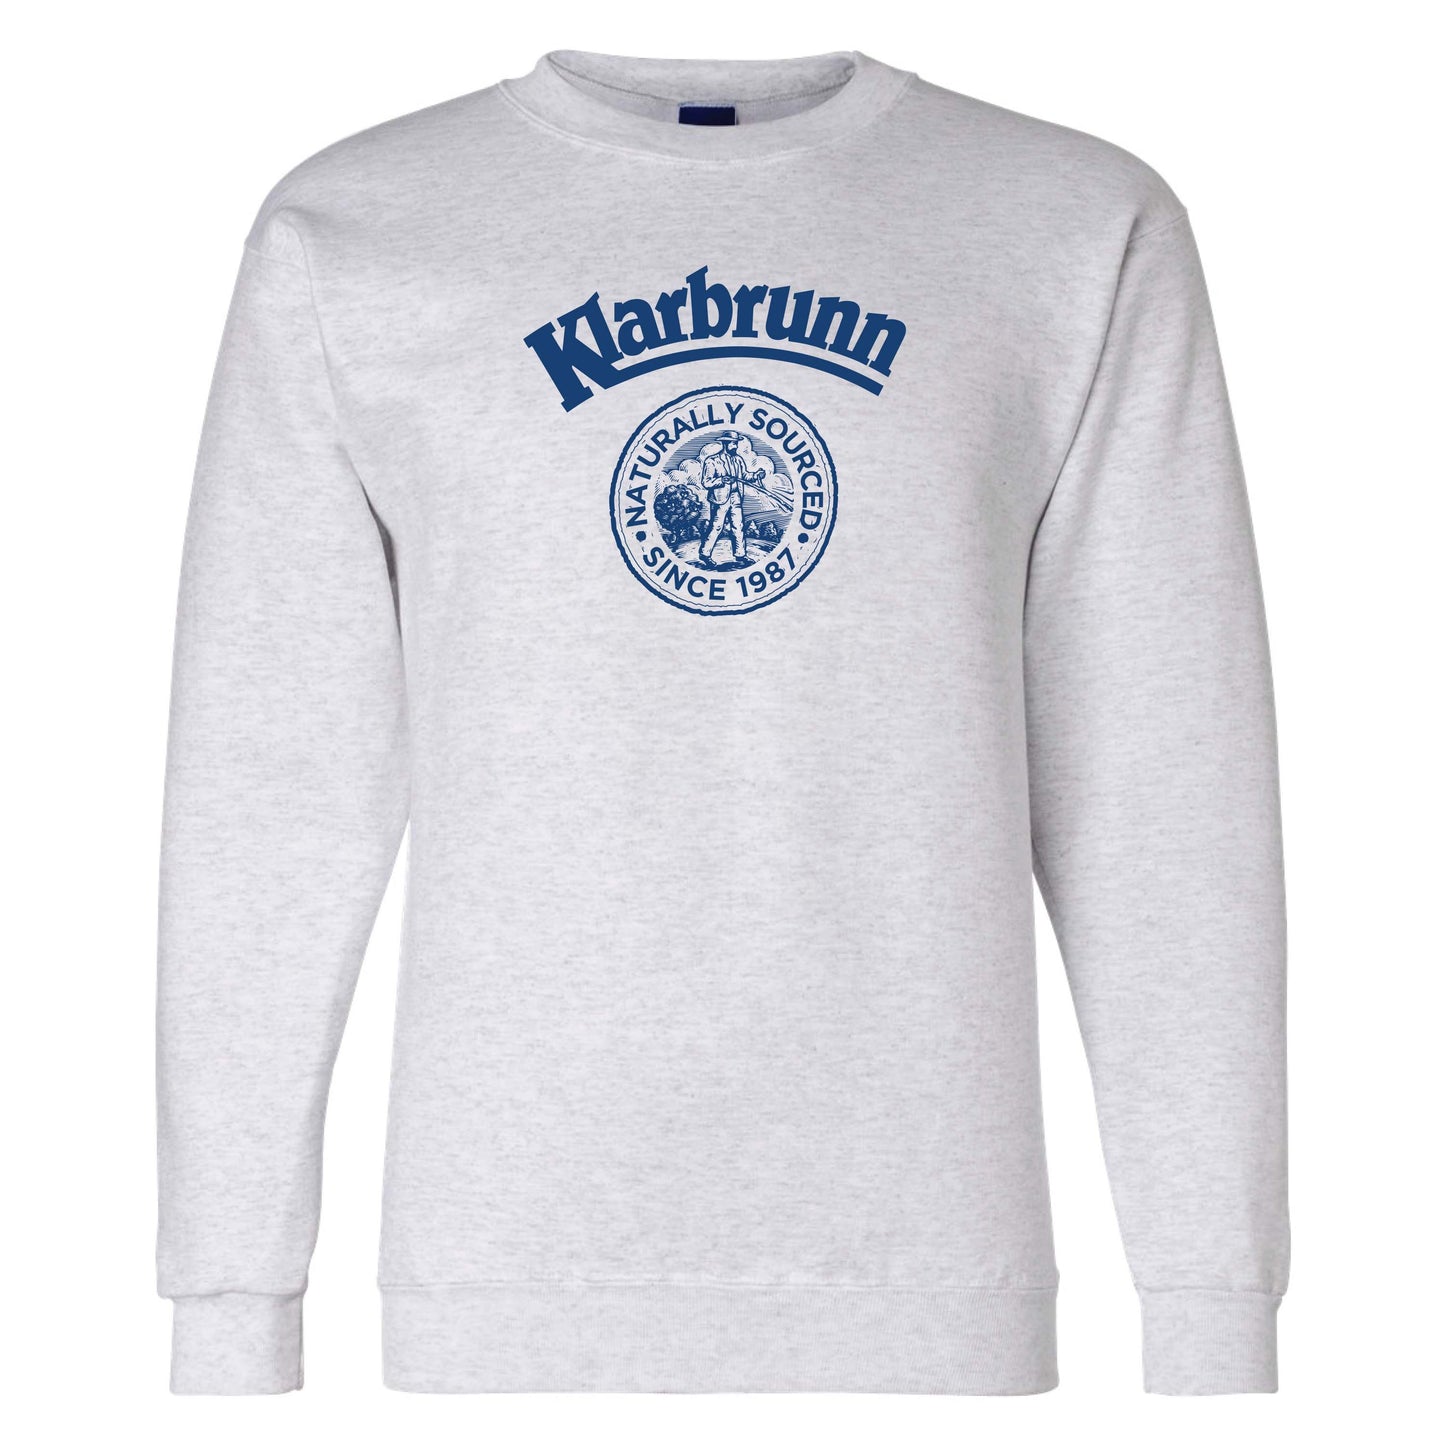 grey heather sweater with retro klarbrunn logo on front. "naturally sourced since 1987"